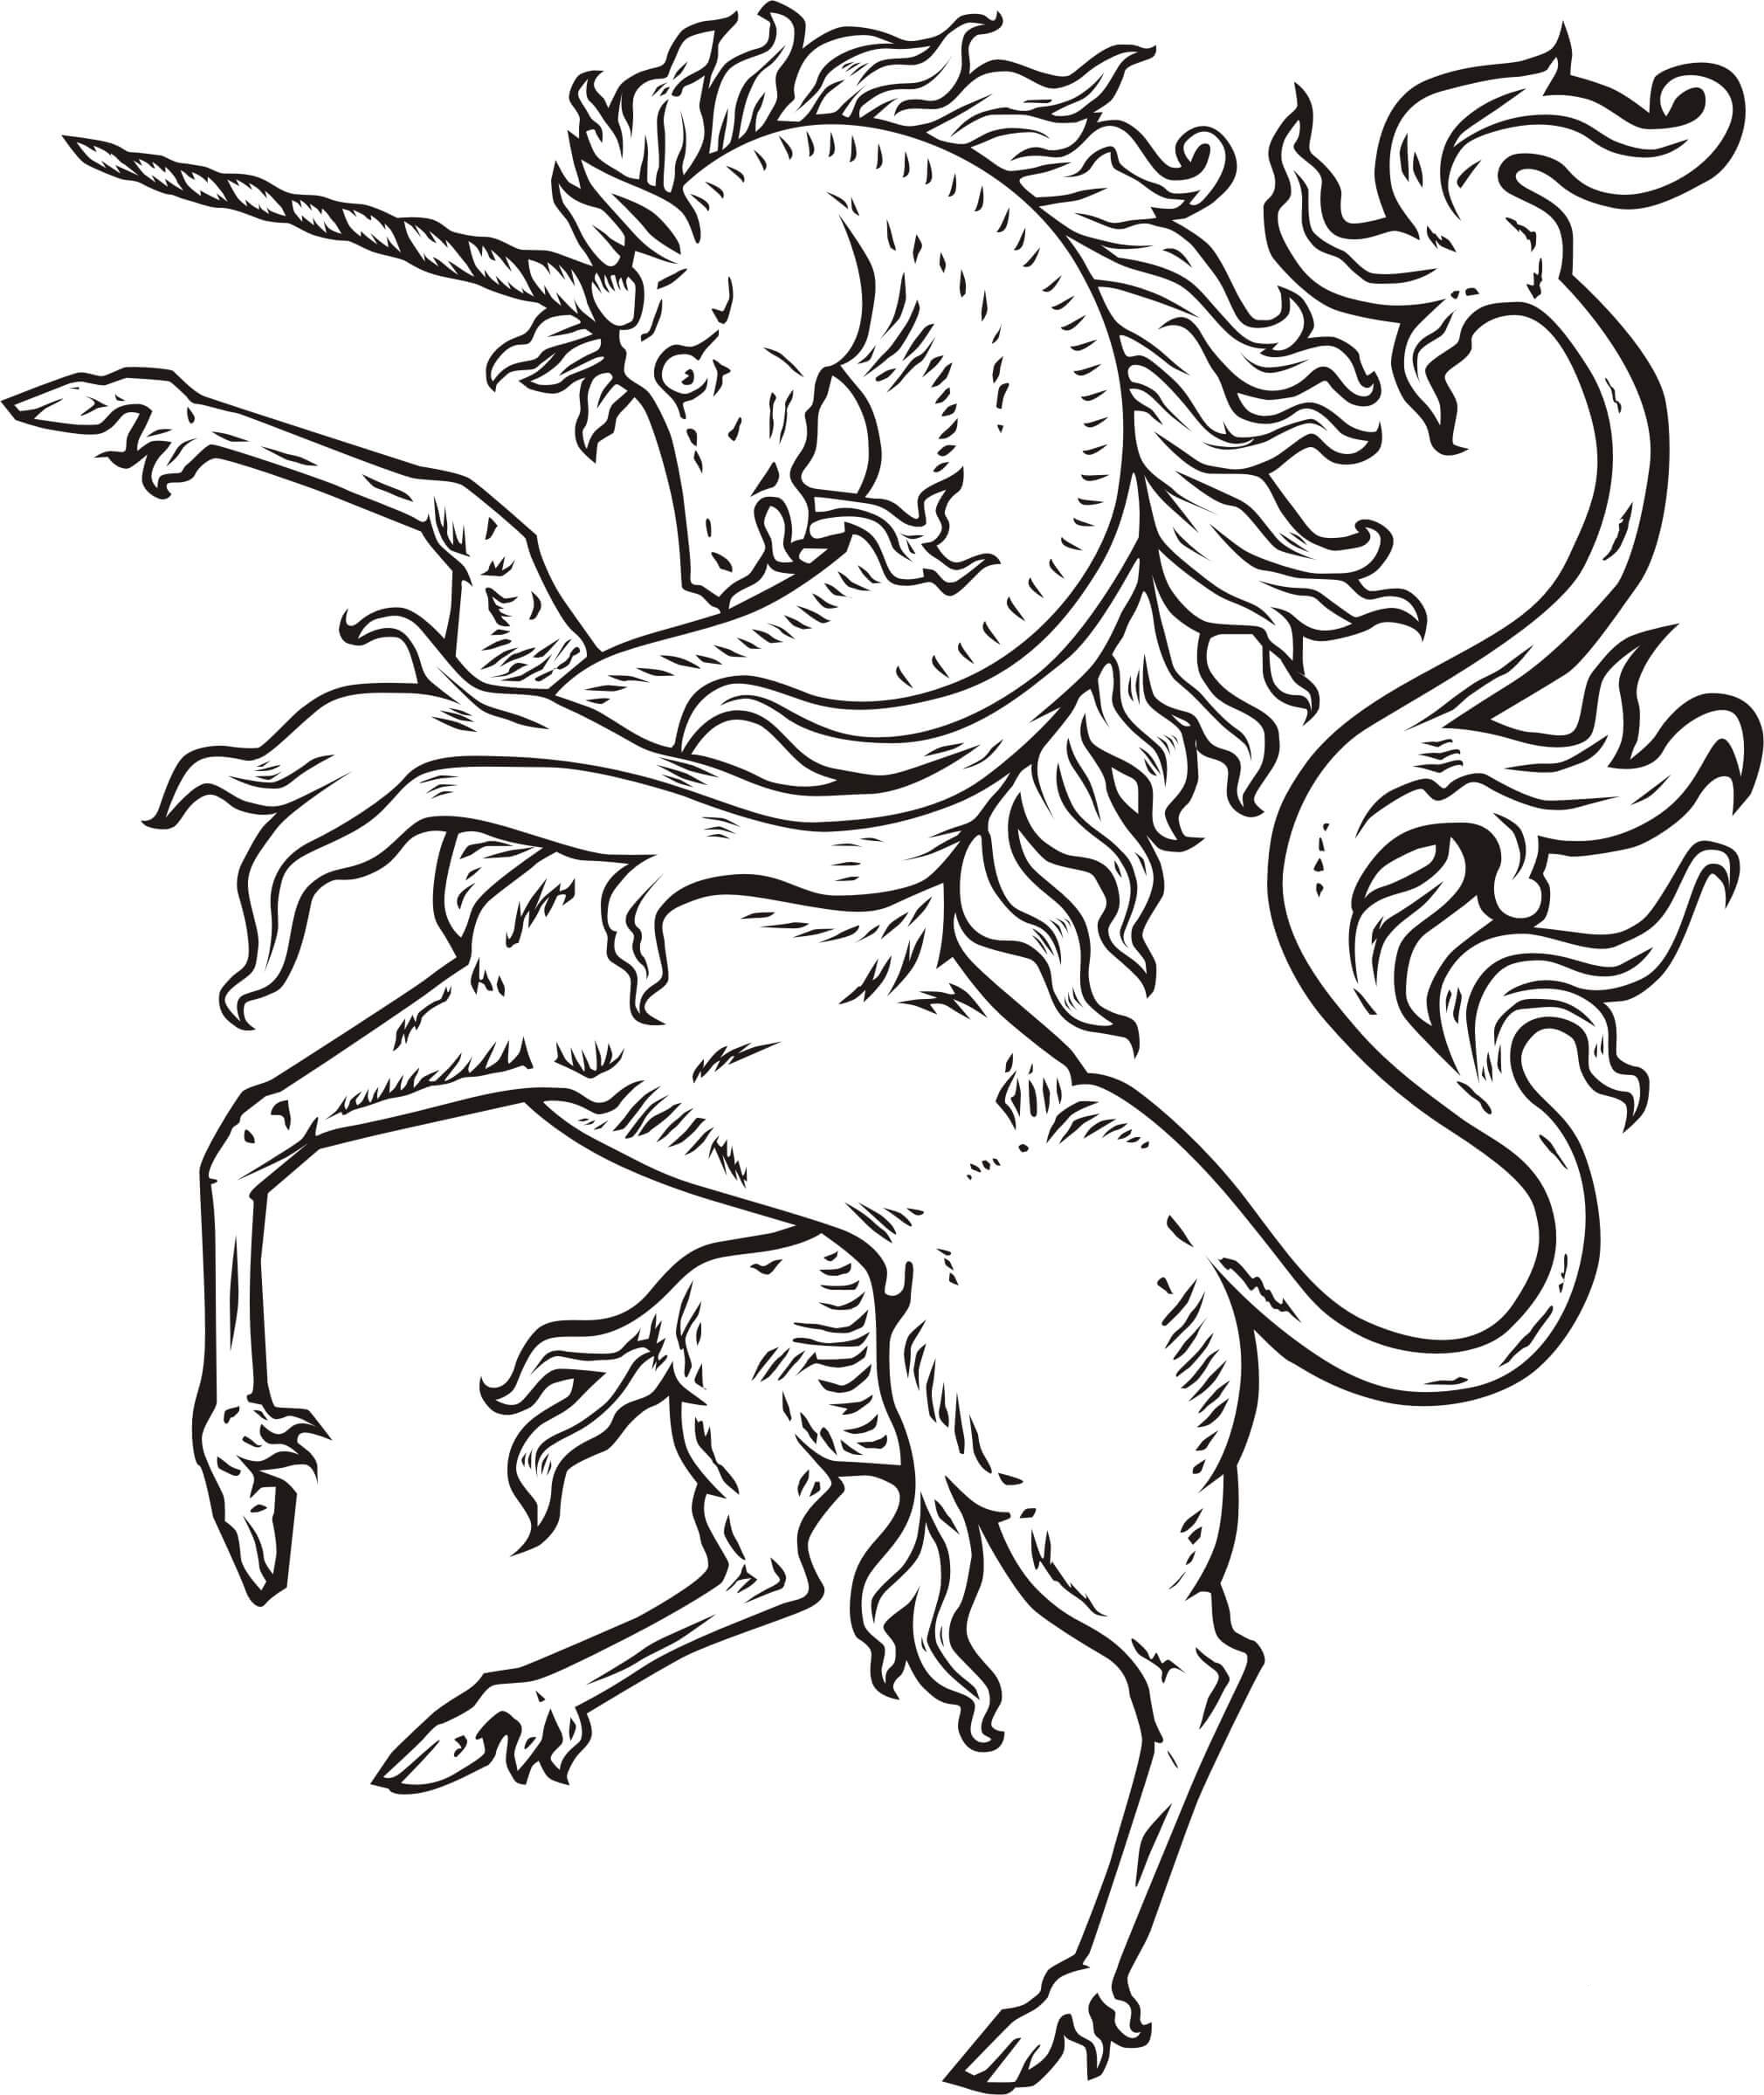 Download Unicorn Coloring Pages for Adults - Best Coloring Pages ...